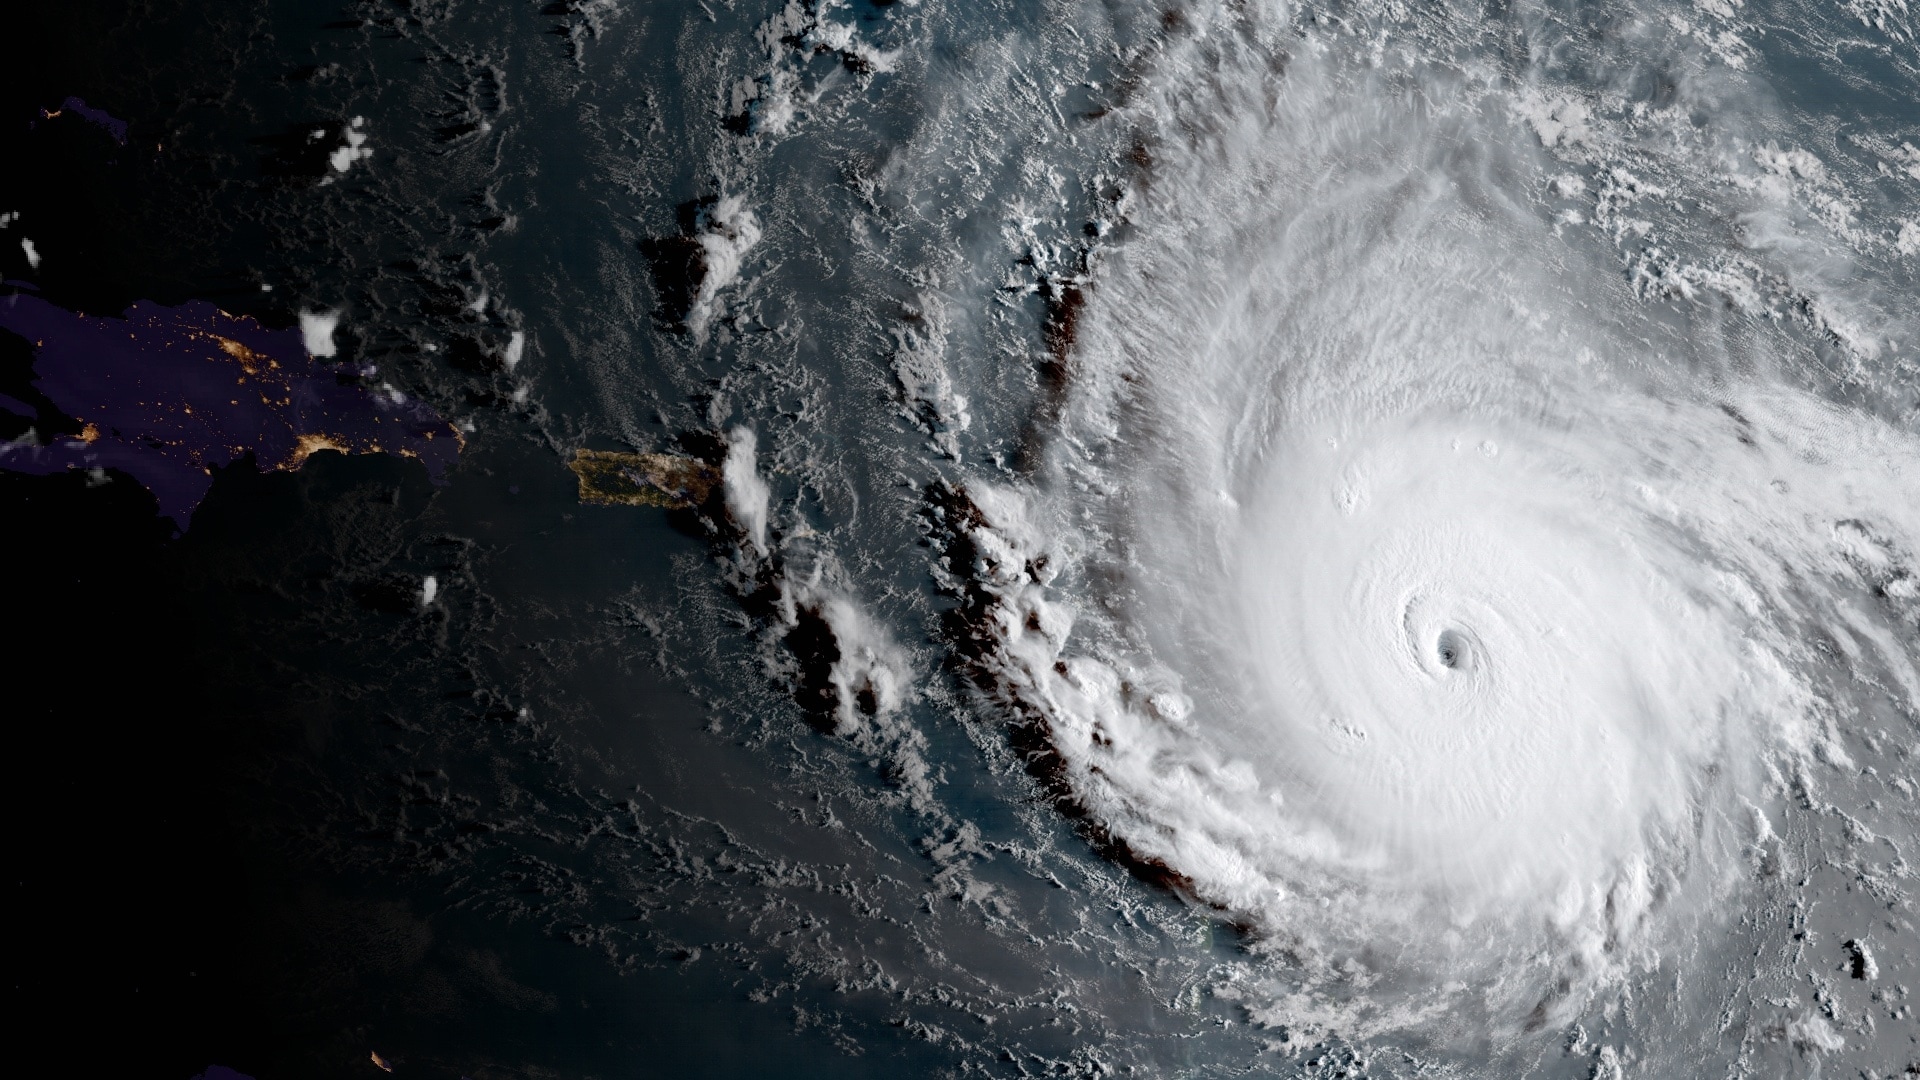 Apple donates $ 5 million to fight damage and help those affected by hurricanes Harvey and Irma